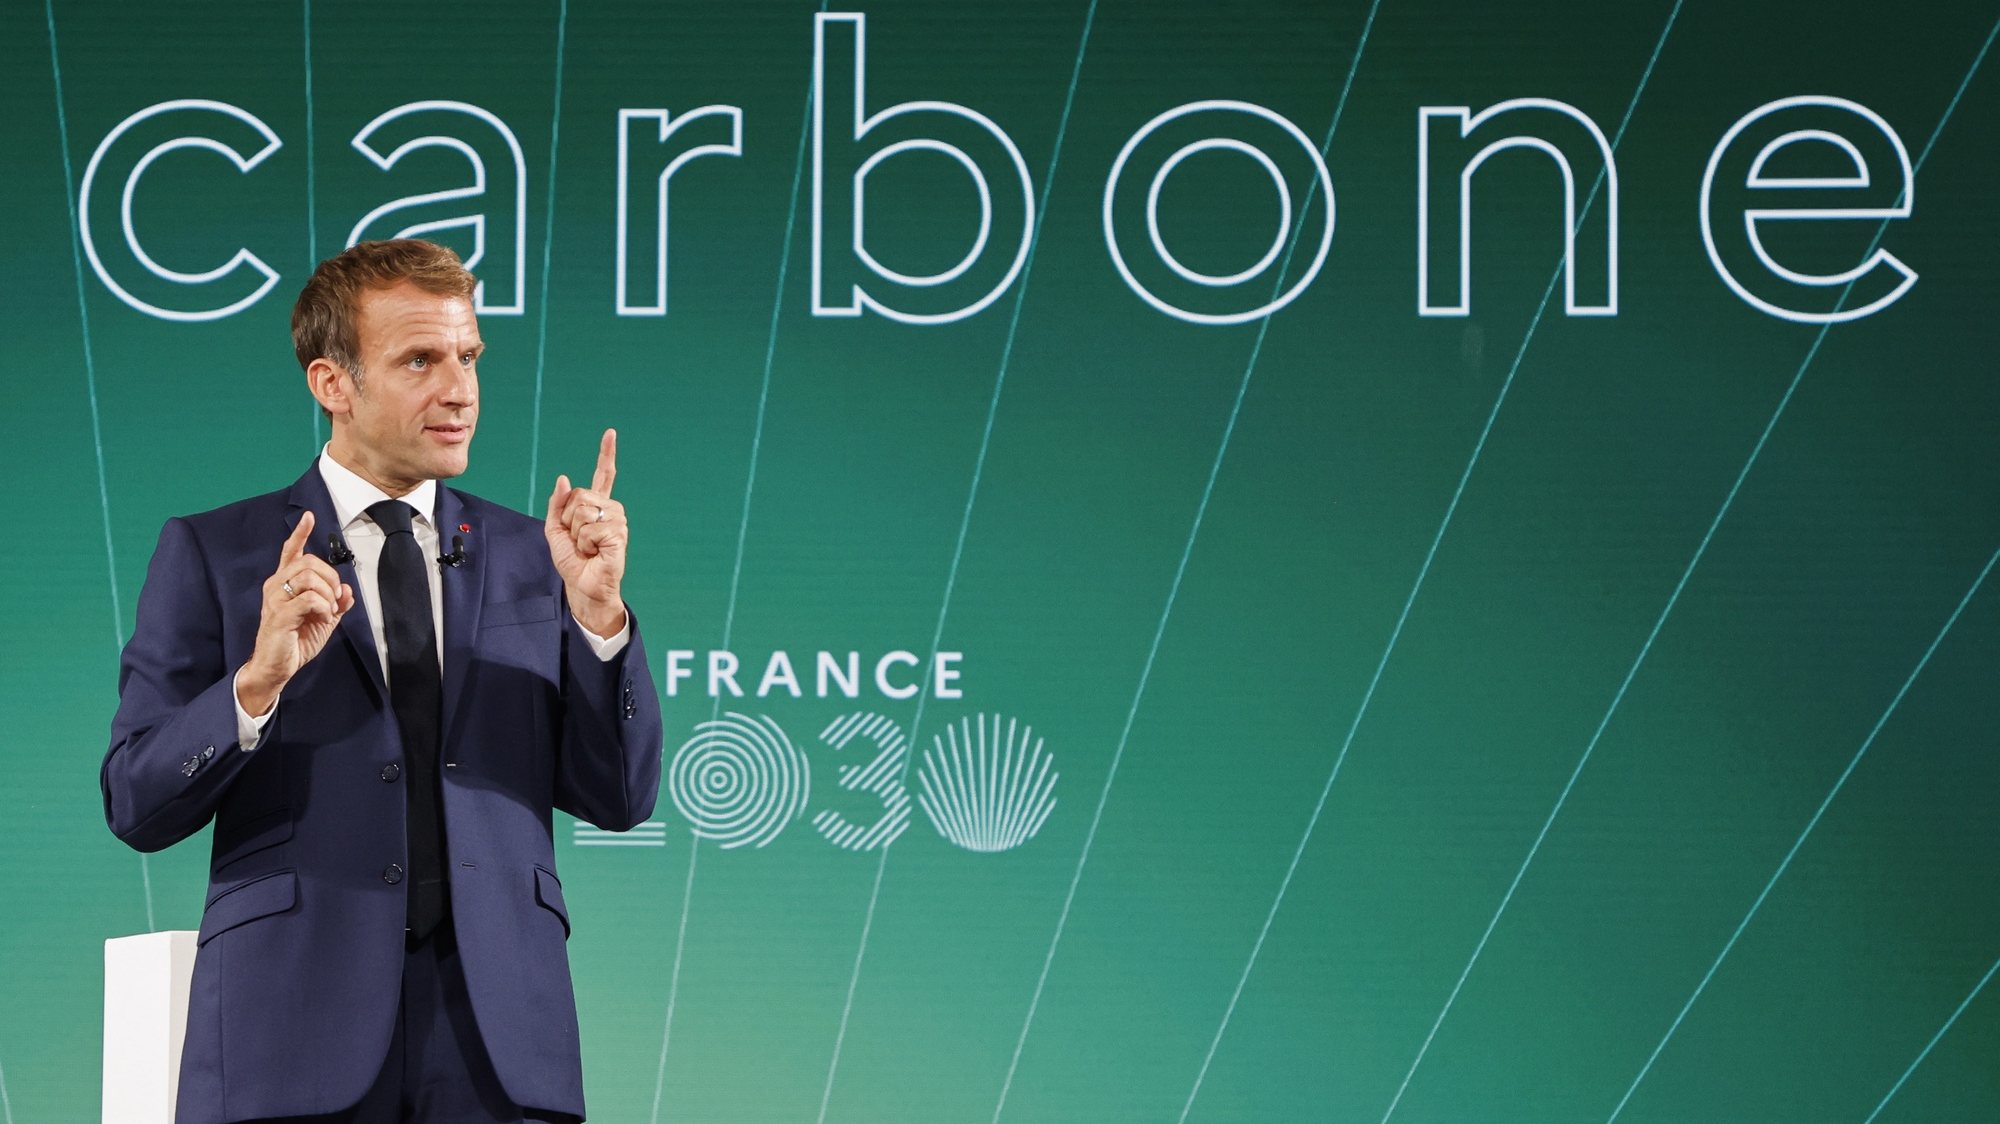 epa09519734 France&#039;s President Emmanuel Macron speaks in front of a screen with the word &quot;Carbon&quot; during the presentation of &quot;France 2030&quot; investment plan at The Elysee Presidential Palace in Paris, France, 12 October 2021. Hydrogen, semiconductors or electric batteries: French President Macron details on 12 October 2021 the priority sectors of the &quot;France 2030&quot; plan to &quot;bring out the champions of tomorrow&quot;, in the face of Chinese and American competition and criticism of the &quot;decline&quot; of France.  EPA/LUDOVIC MARIN / POOL  MAXPPP OUT